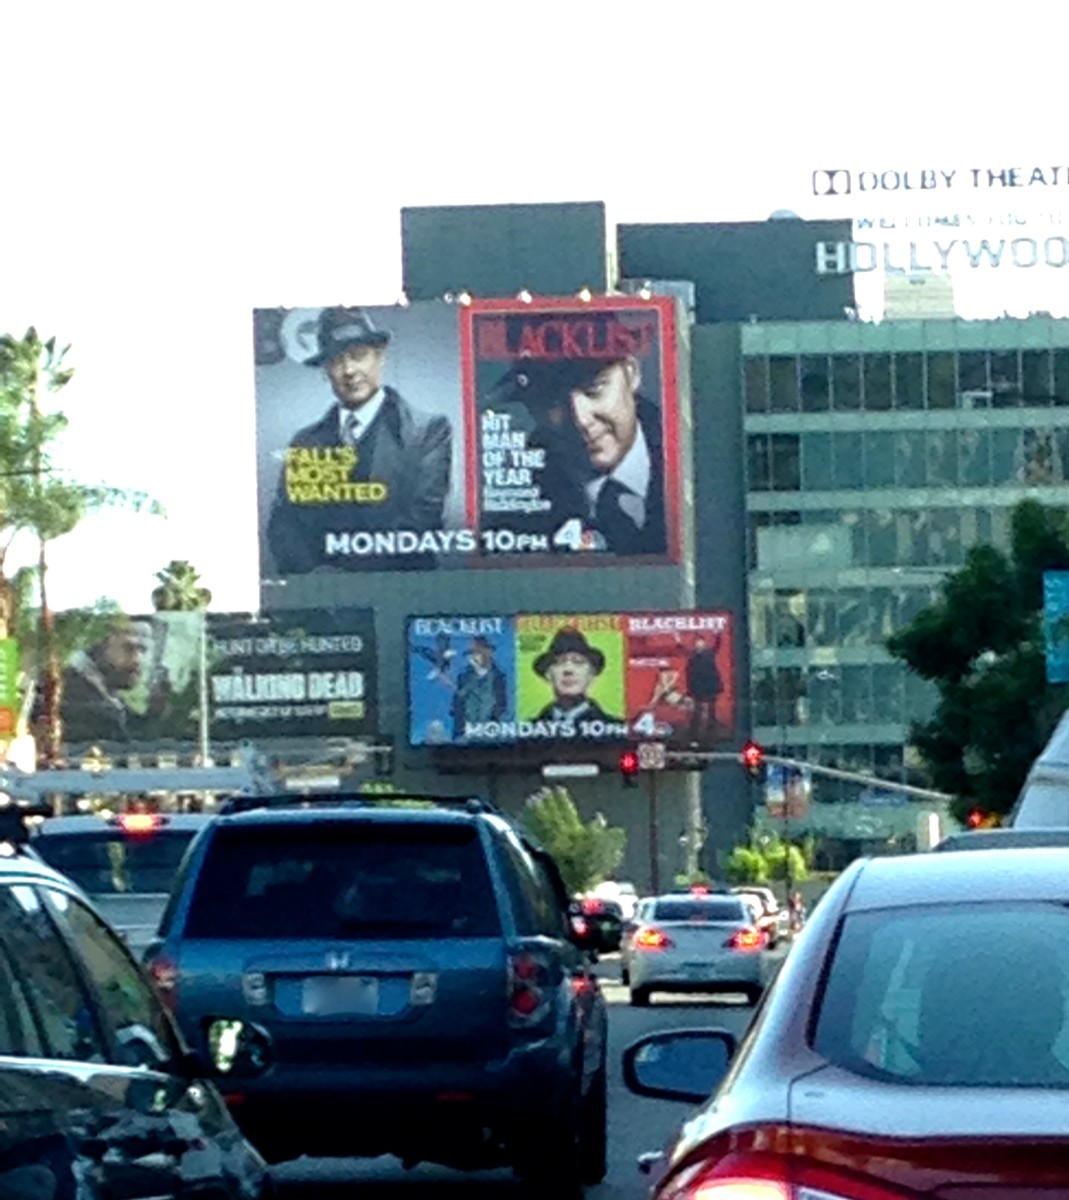 Sunset Boulevard in Hollywood.